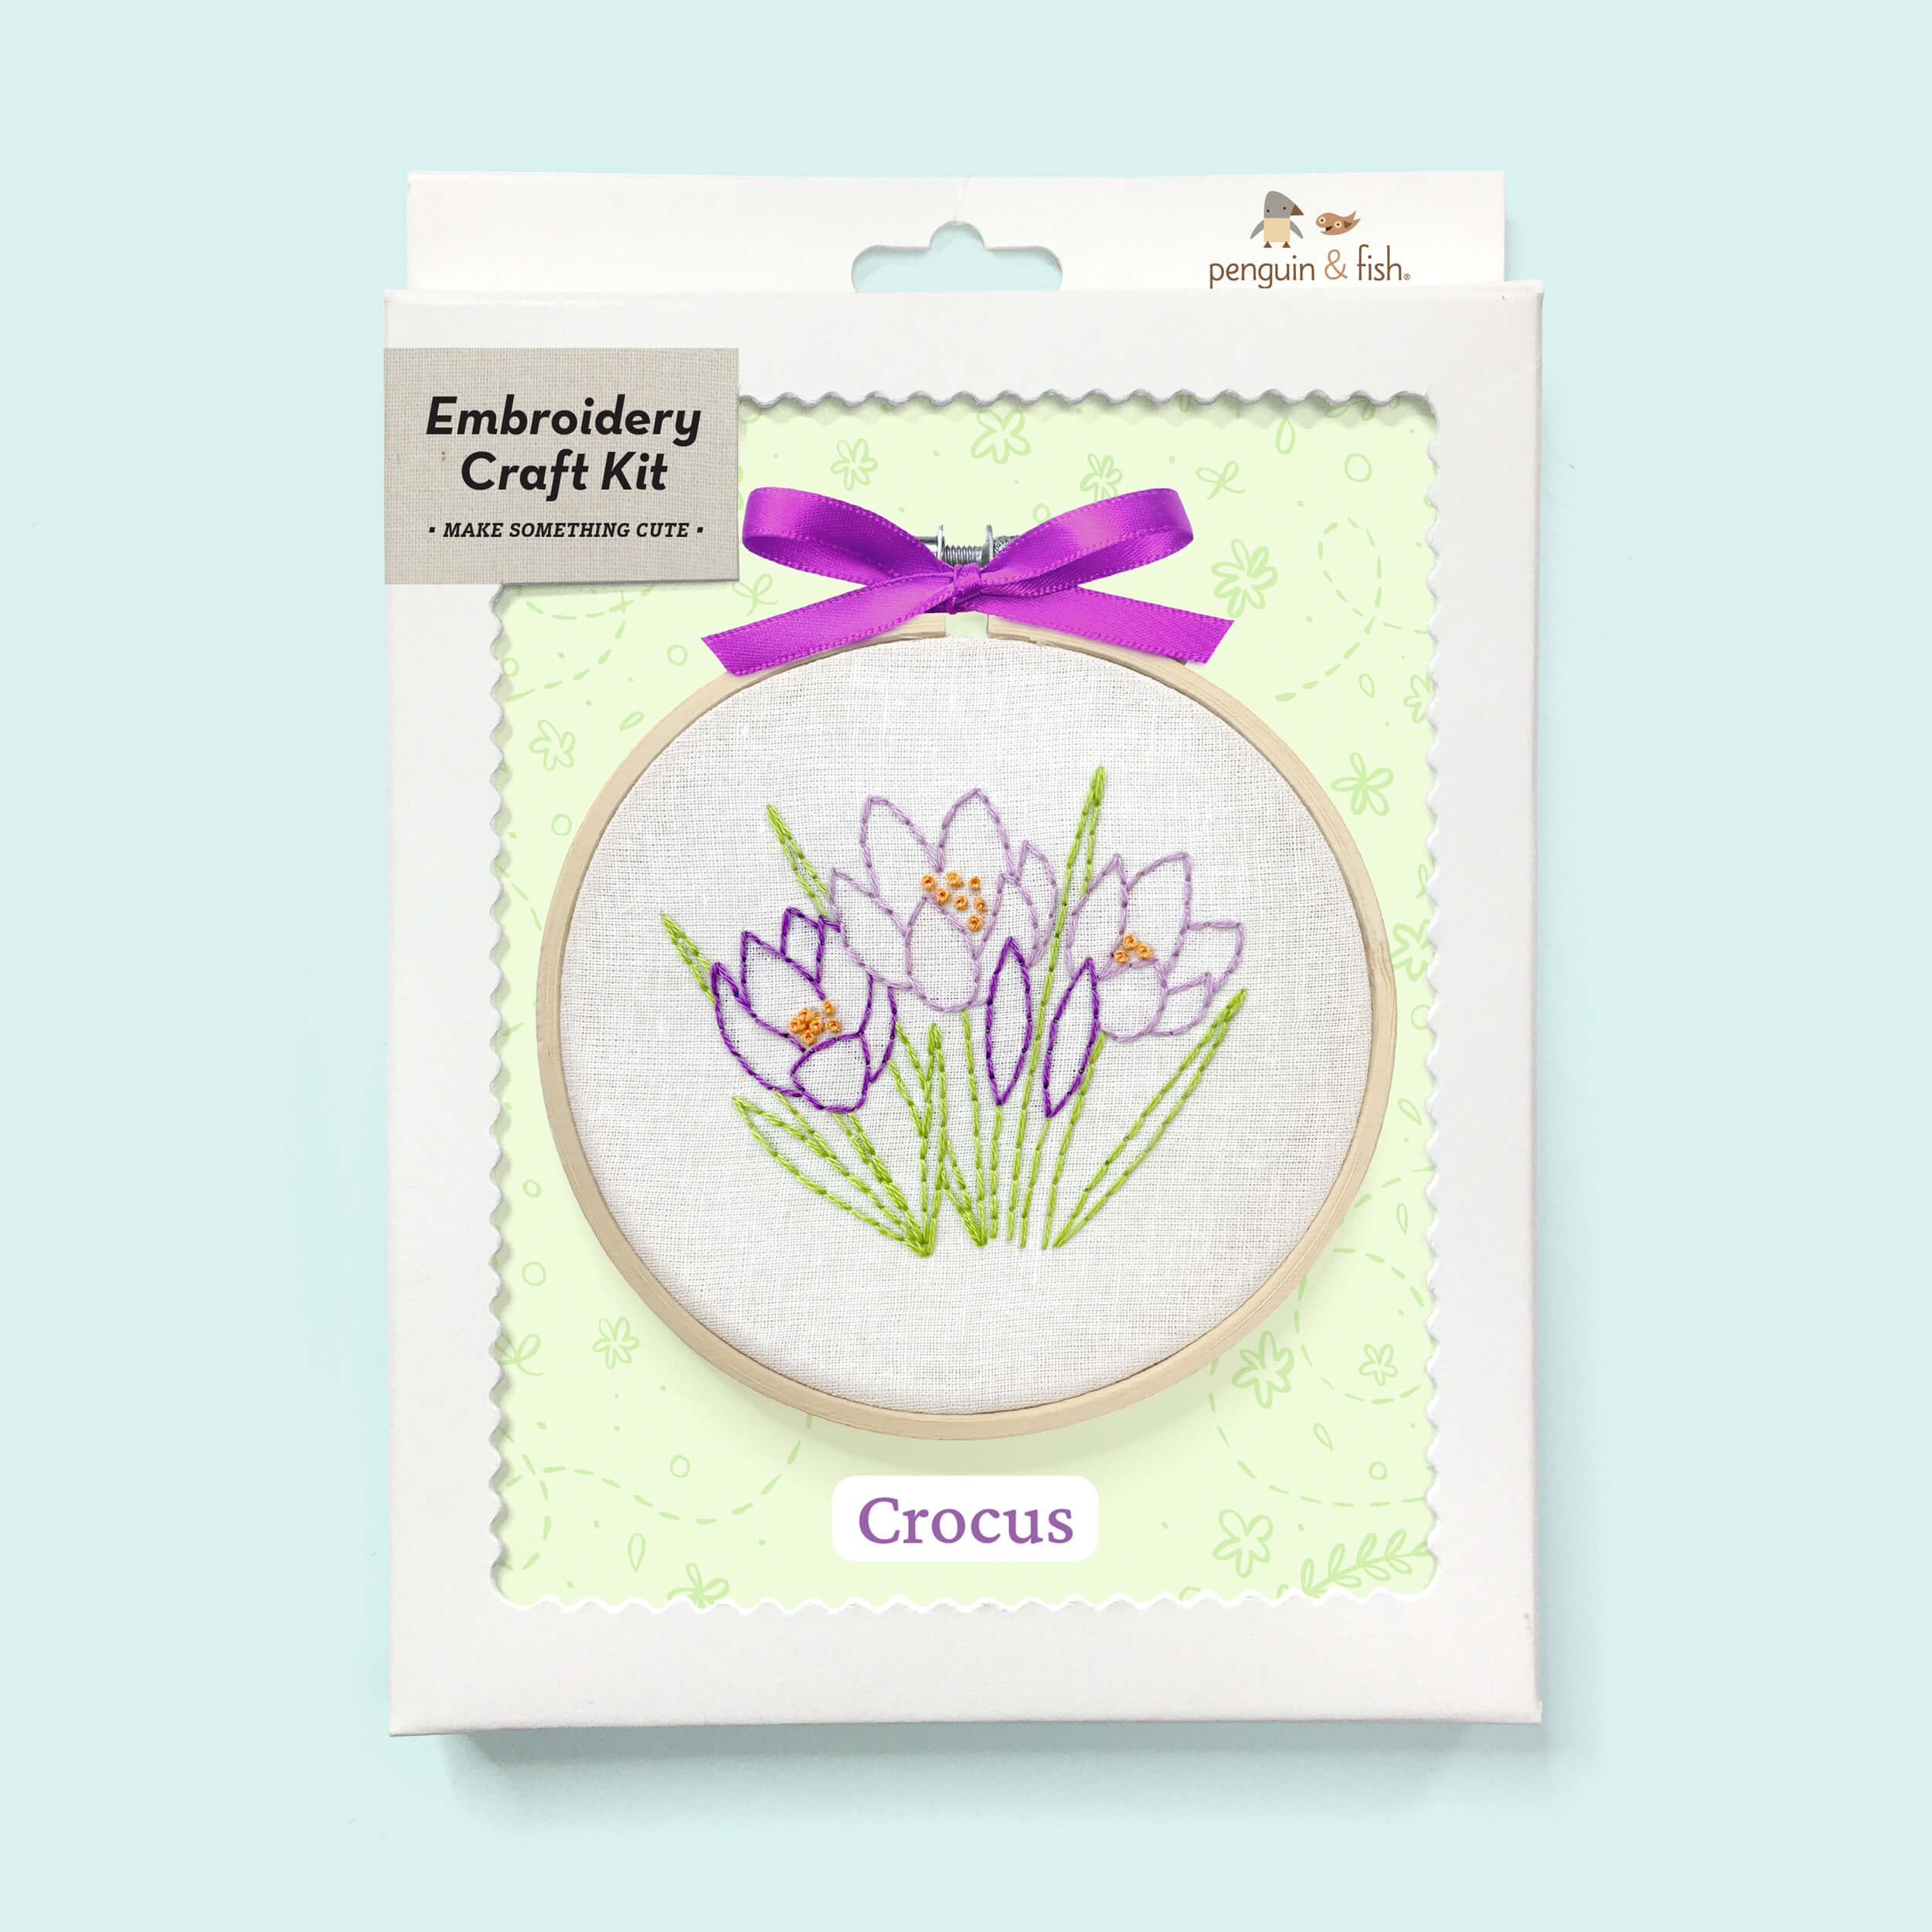 Crocus 4-inch embroidery kit with supplies in a box